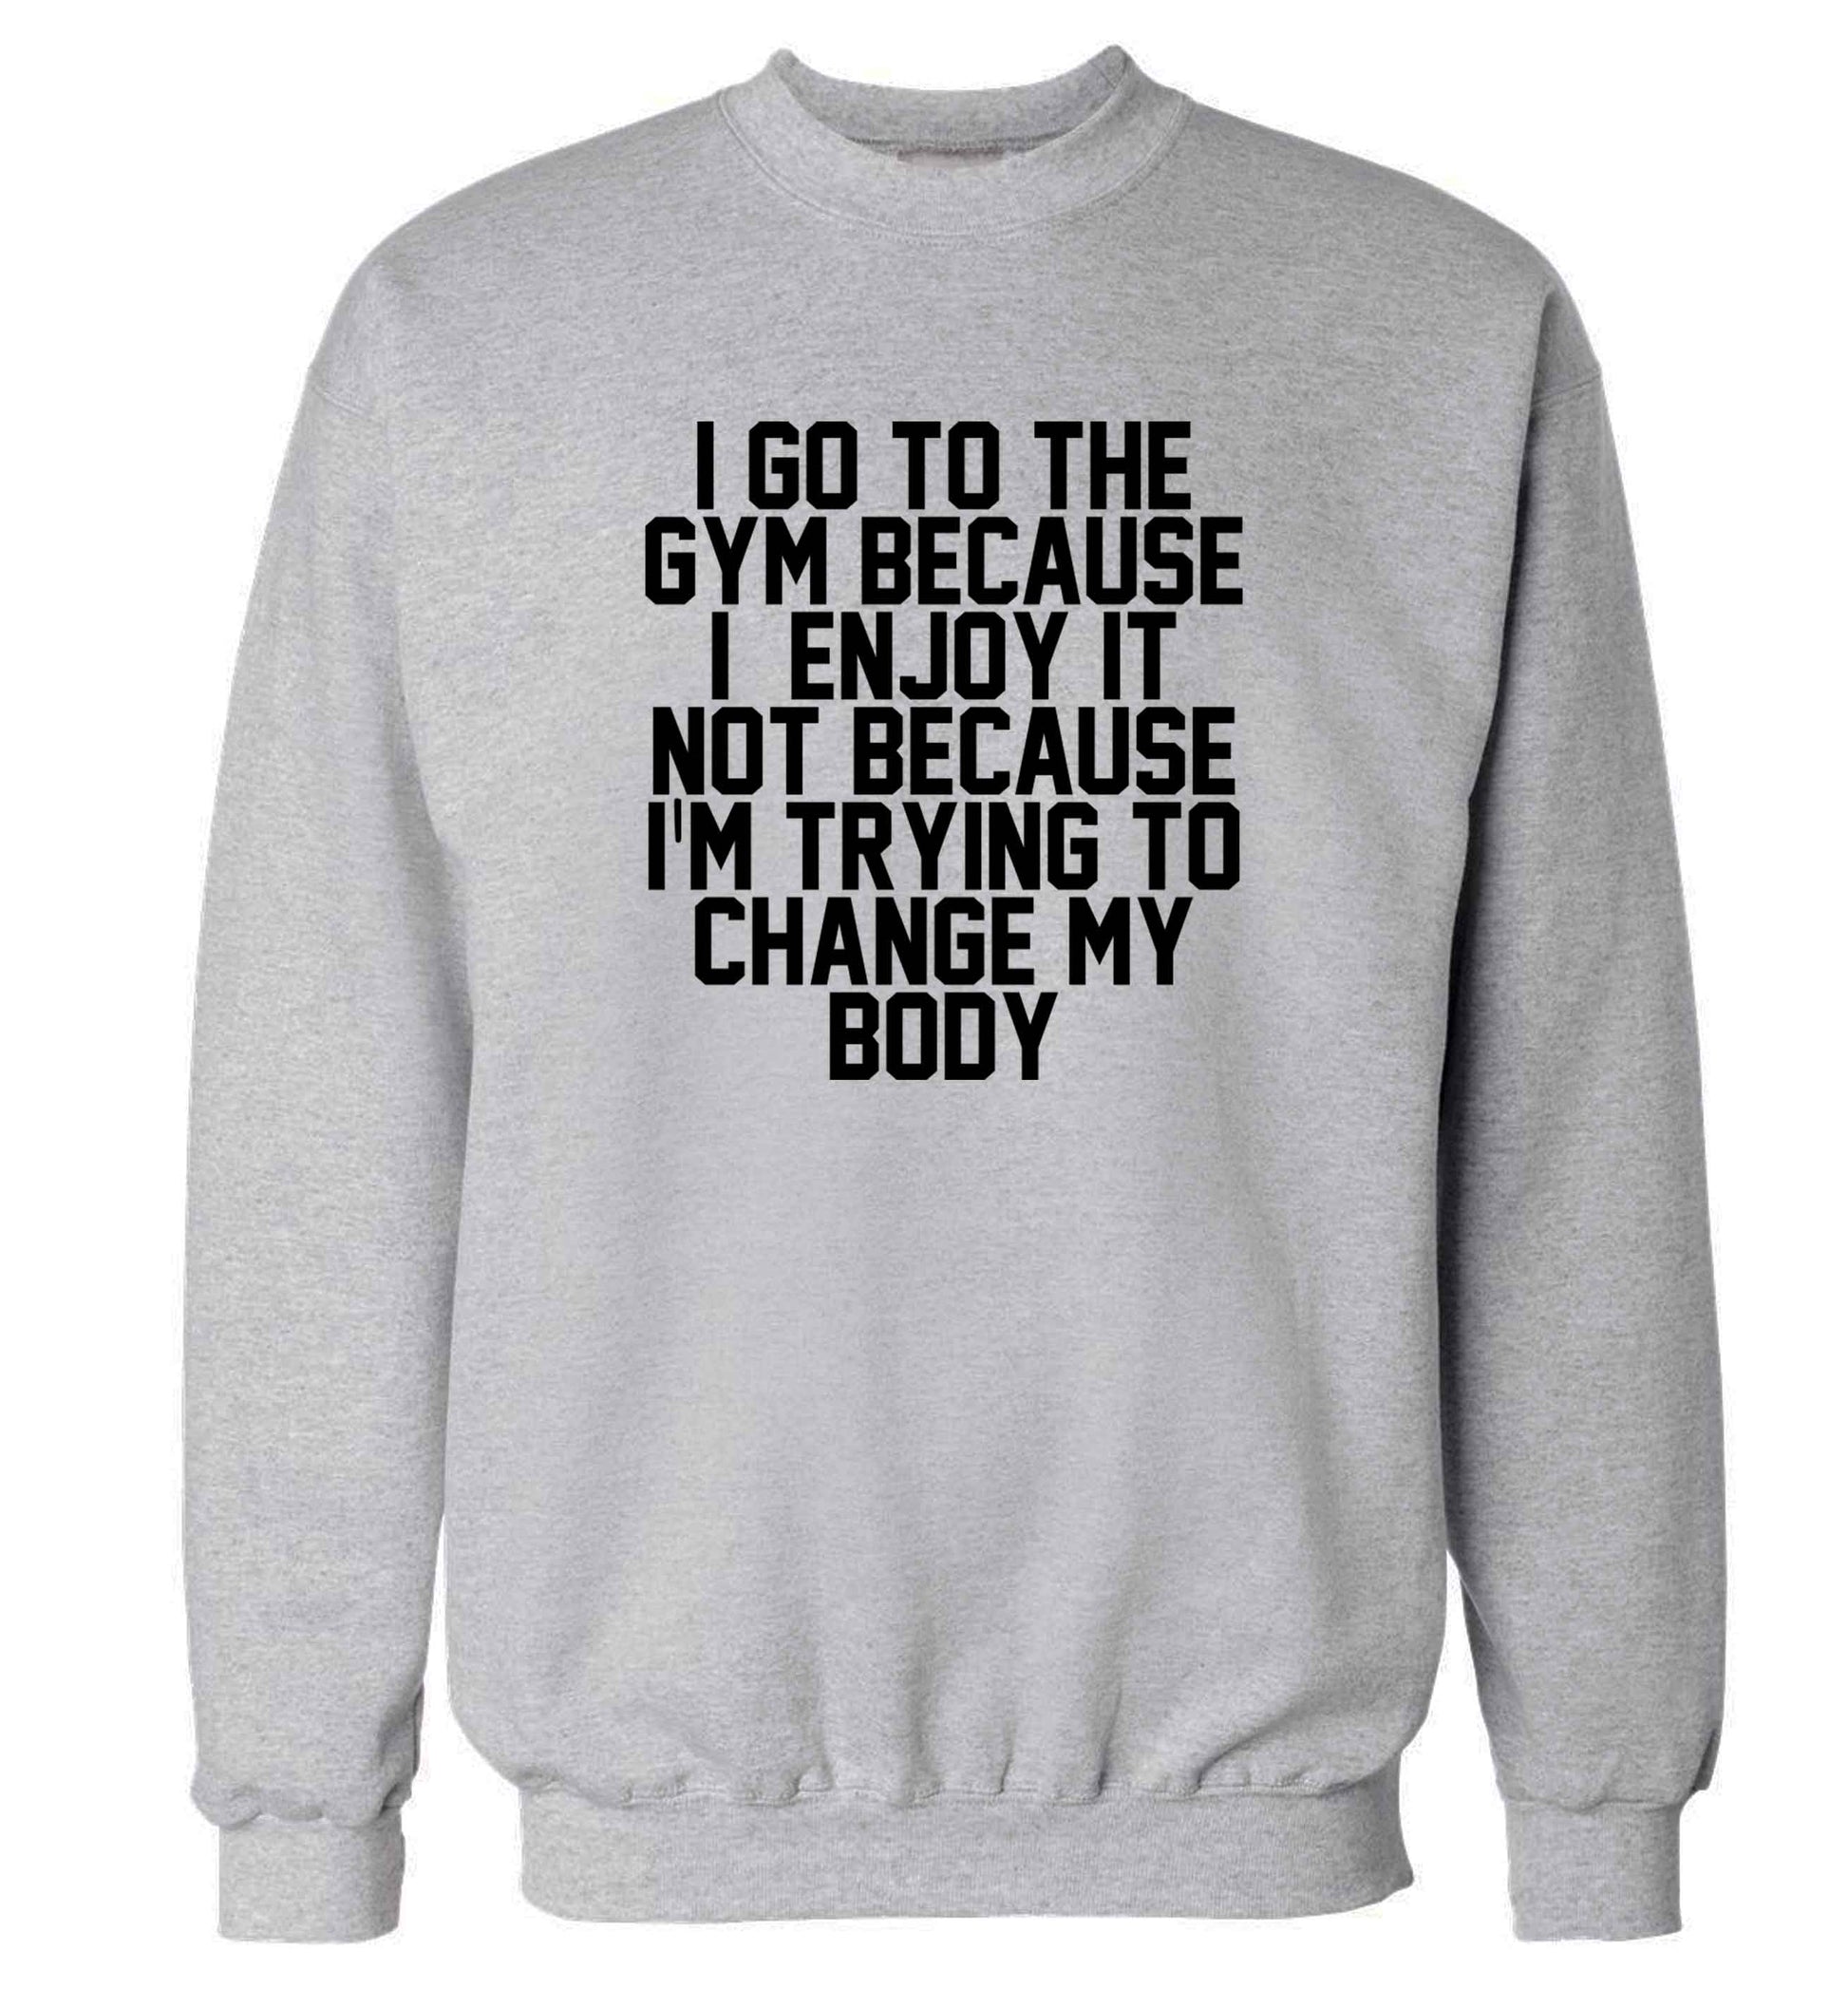 I go to the gym because I enjoy it not because I'm trying to change my body adult's unisex grey sweater 2XL